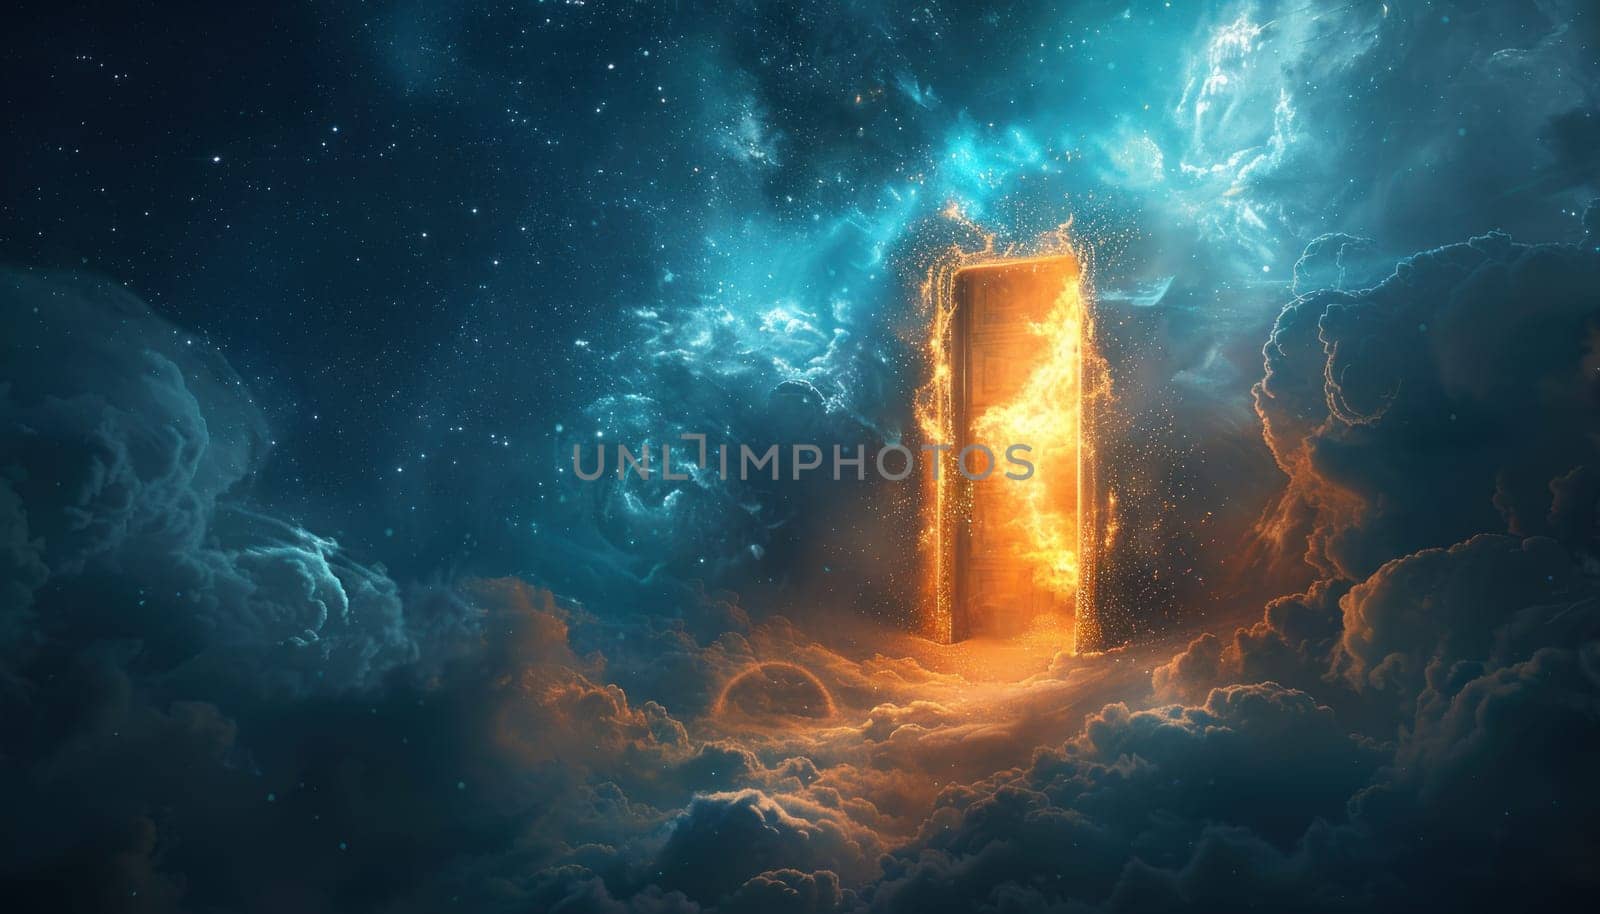 A door is open in a space filled with orange and blue clouds by golfmerrymaker